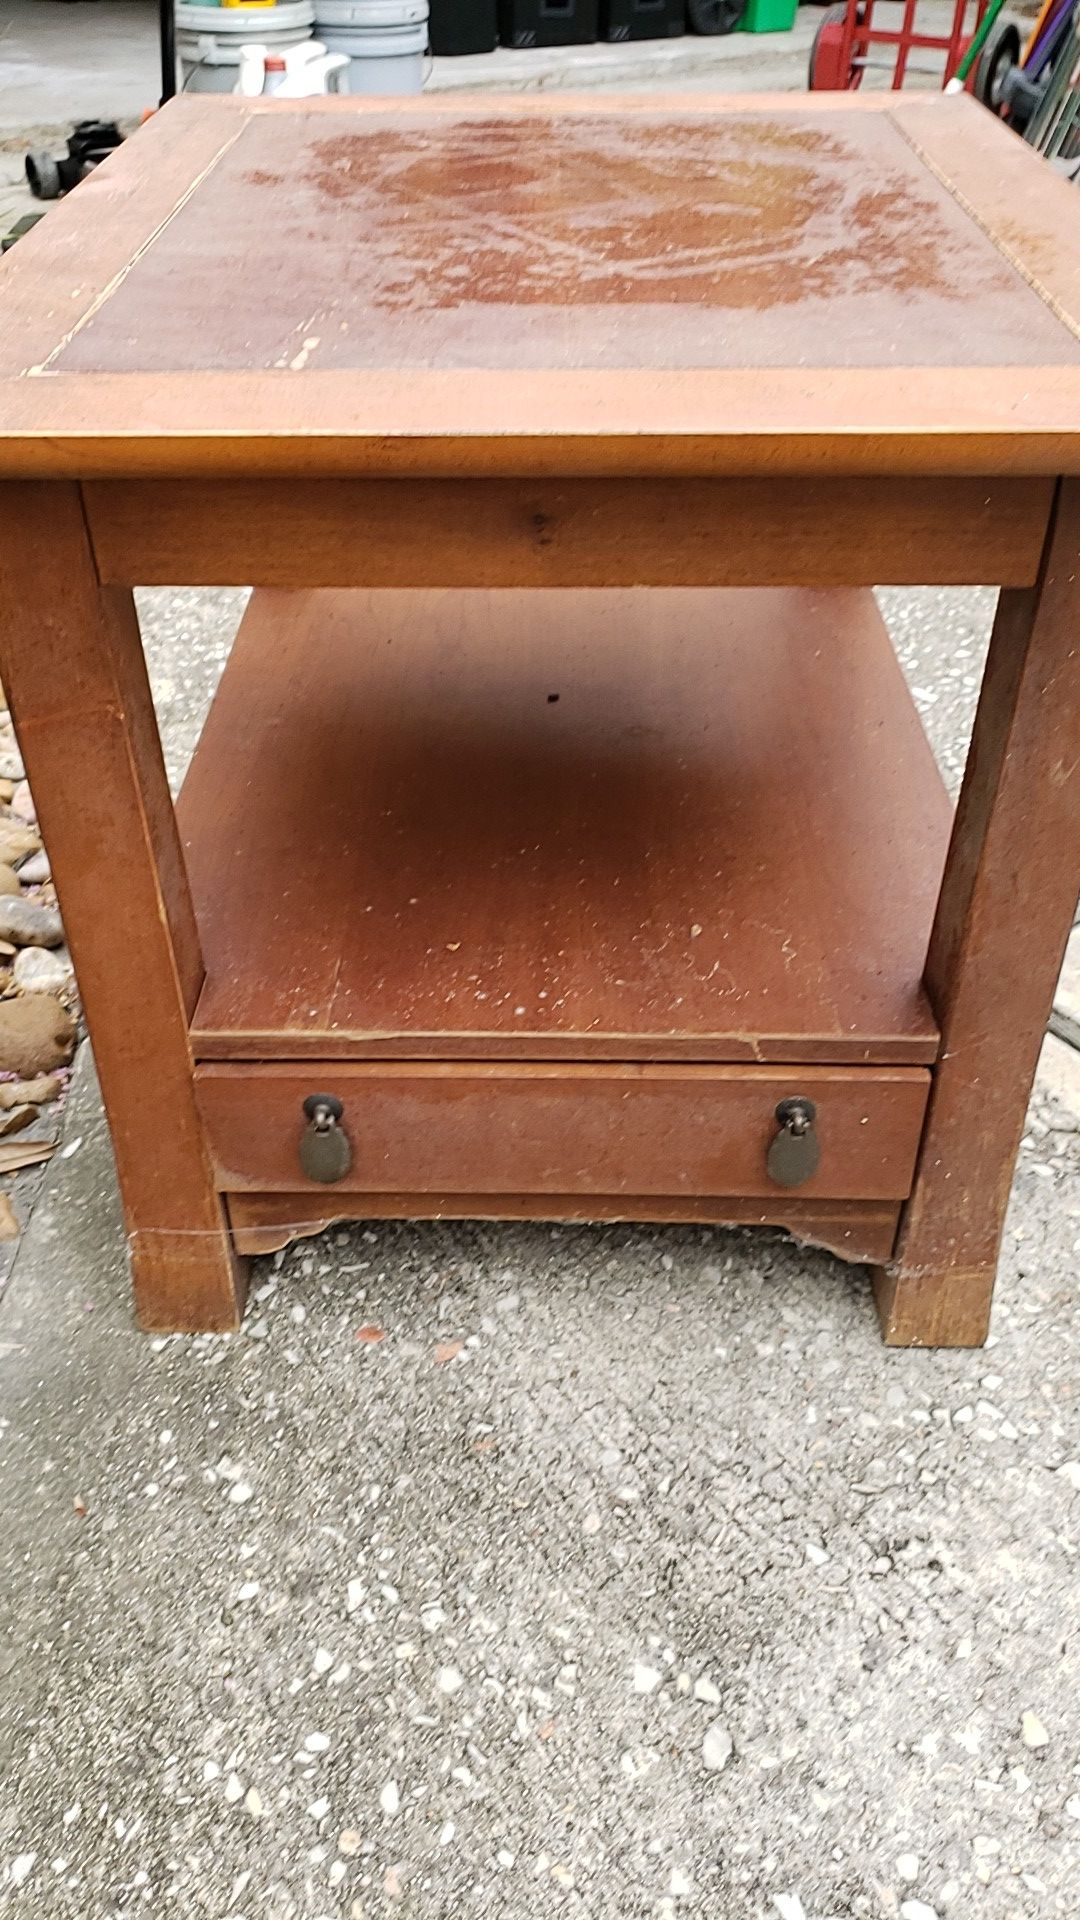 End table with drawer for $20